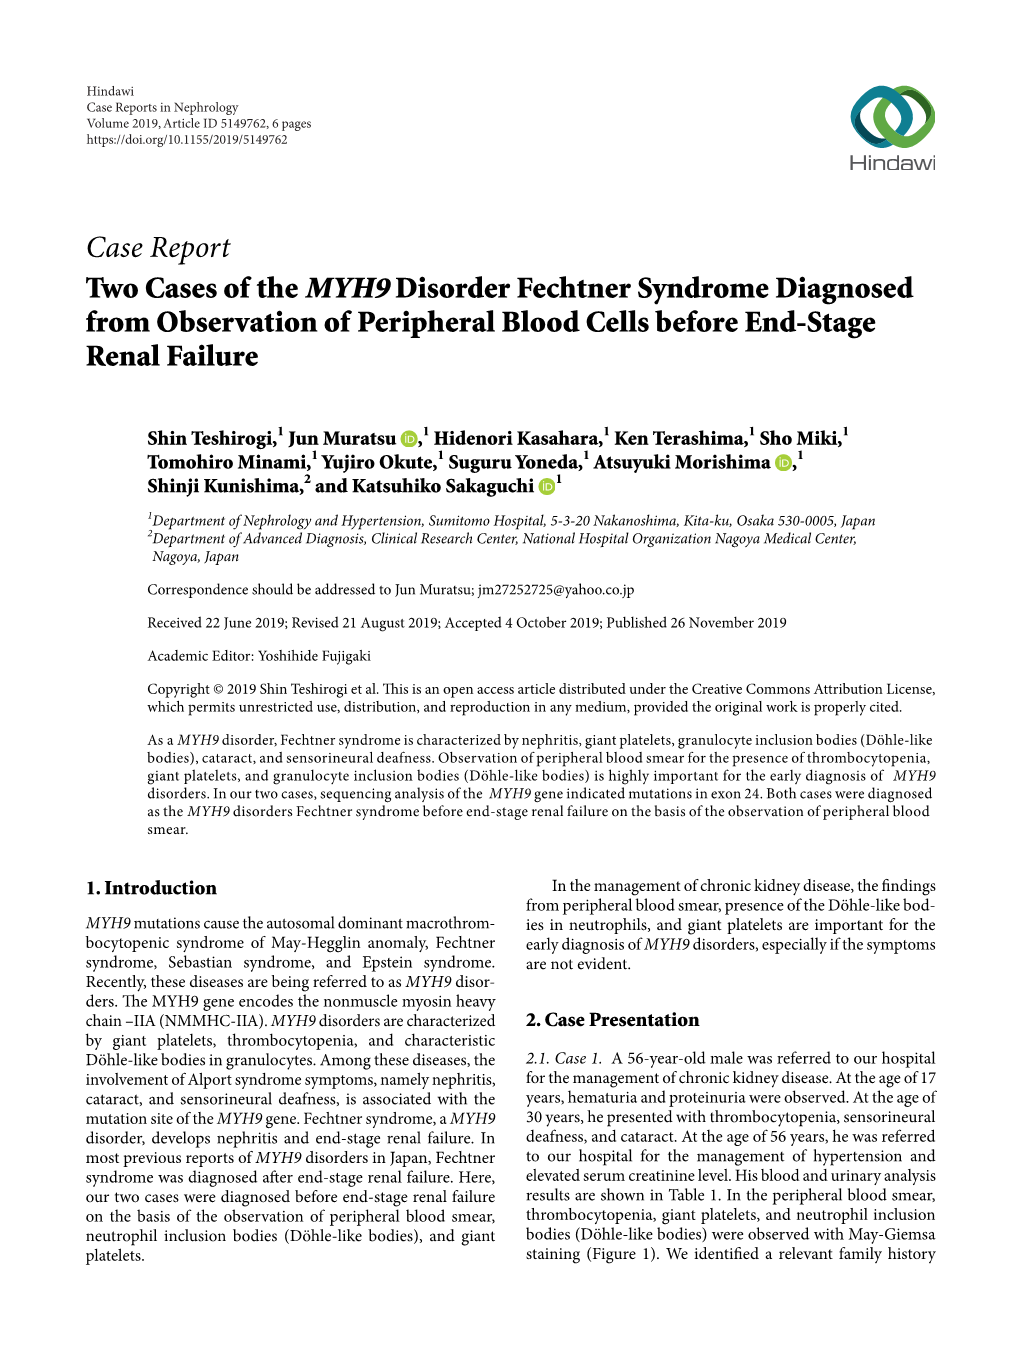 Case Report Two Cases of the MYH9 Disorder Fechtner Syndrome Diagnosed from Observation of Peripheral Blood Cells Before End-Stage Renal Failure